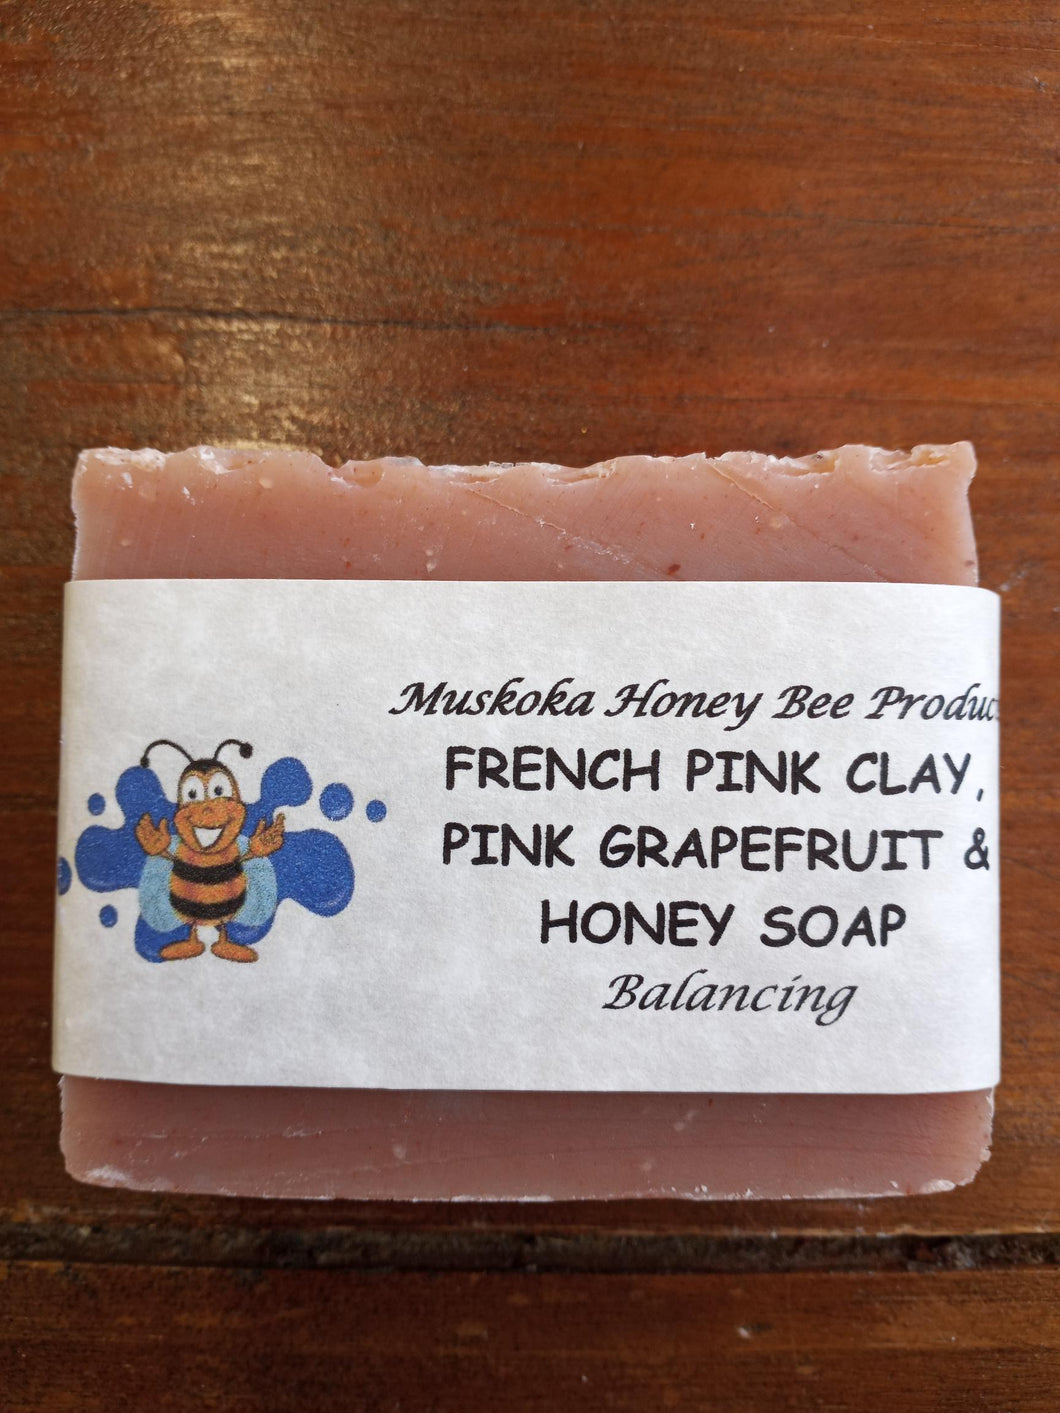 French Pink Clay, Pink Grapefruit & Honey Soap